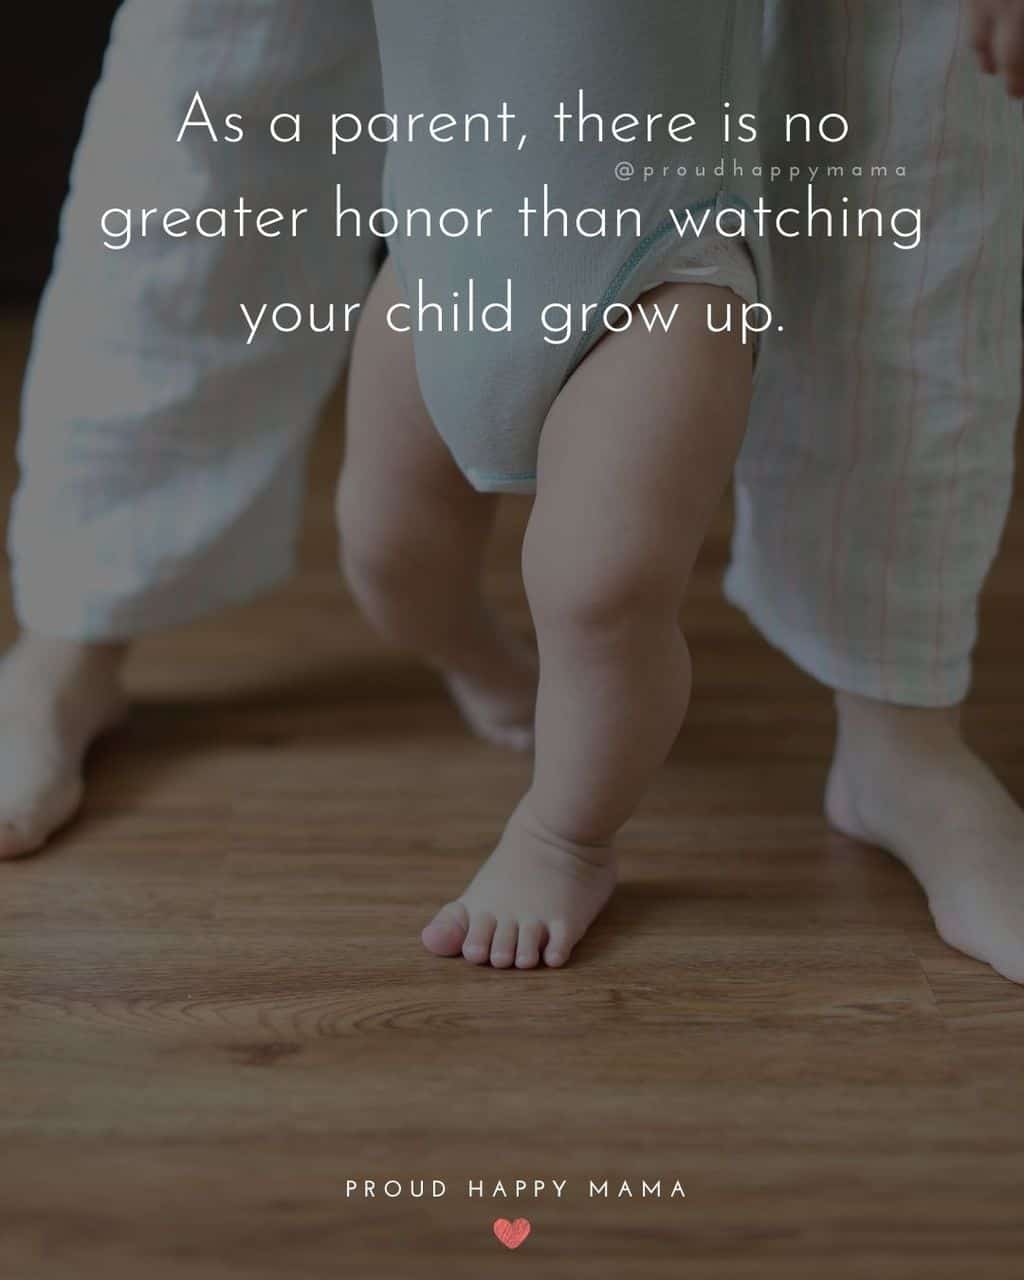 Parenting Quotes - As a parent, there is no greater honor than watching your child grow up.’